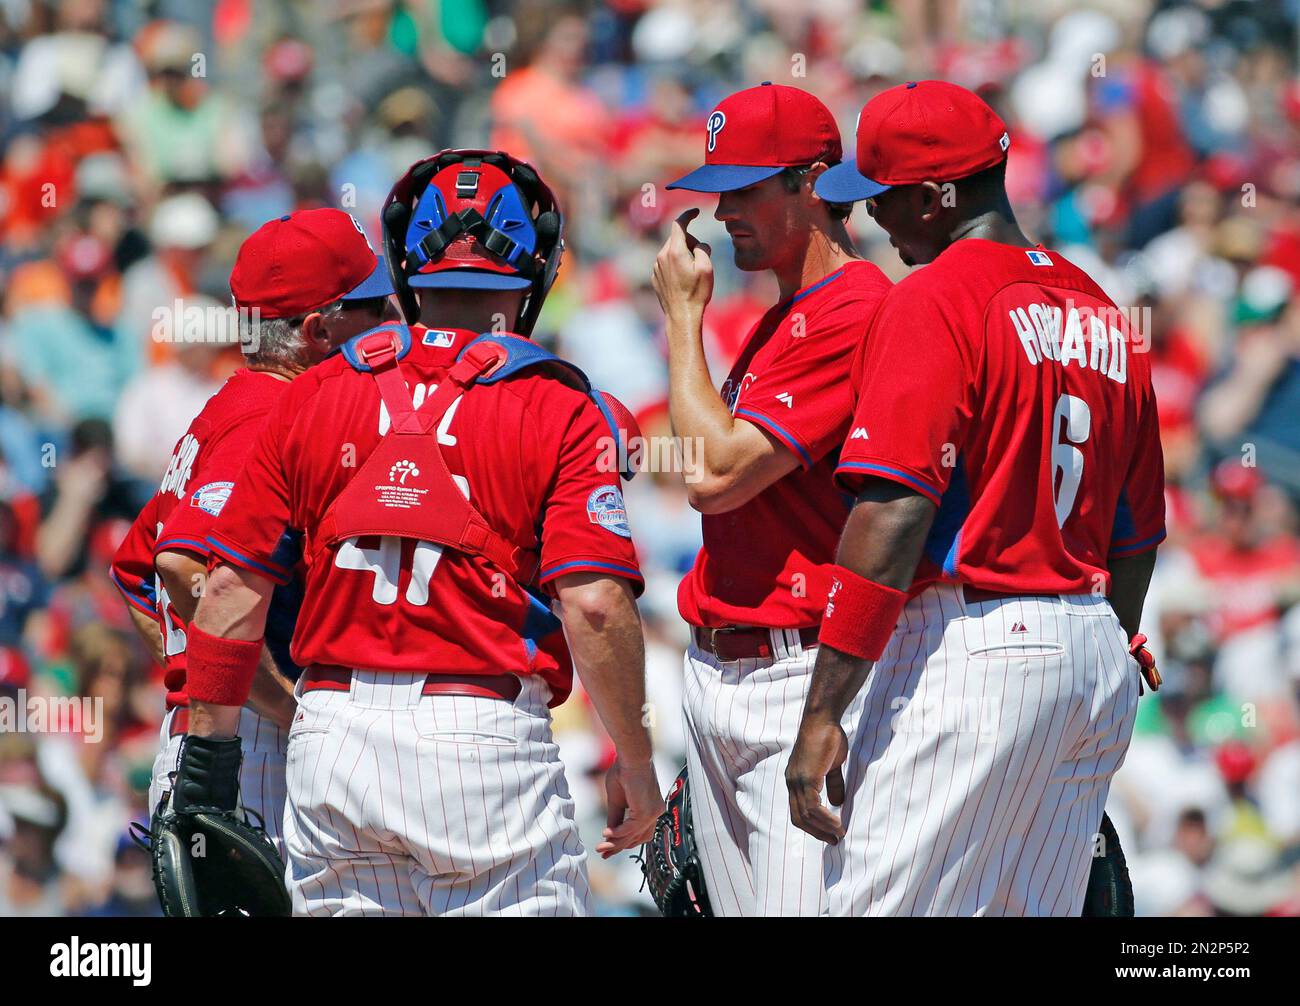 Philadelphia Phillies pitching coach Bob McClure, left, talks with Phillies starting pitcher Cole Hamels, second from right, as teammates gather around in the second inning of a spring training baseball game against